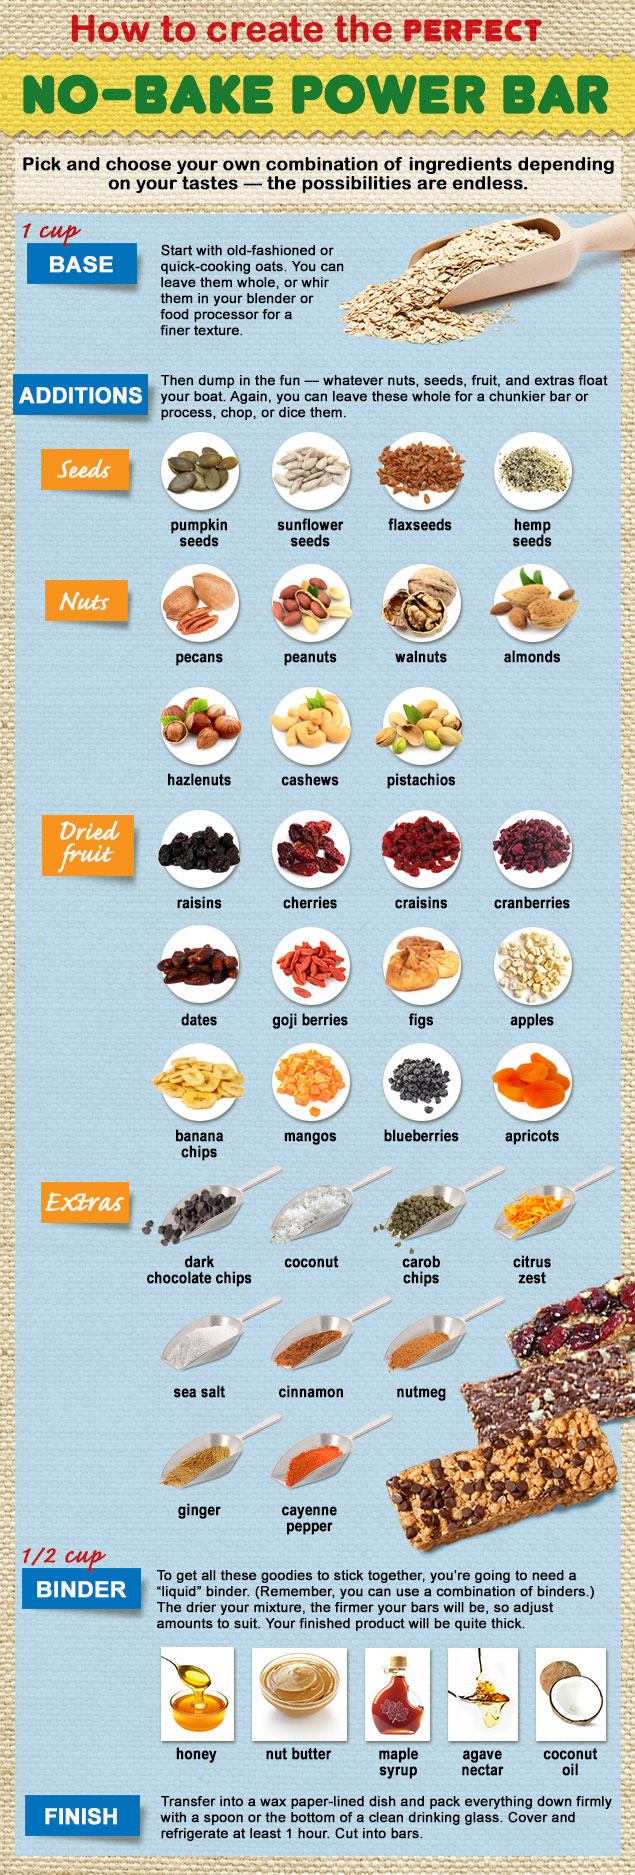 A Guide To Making Perfect No-Bake Power Bars Infographic